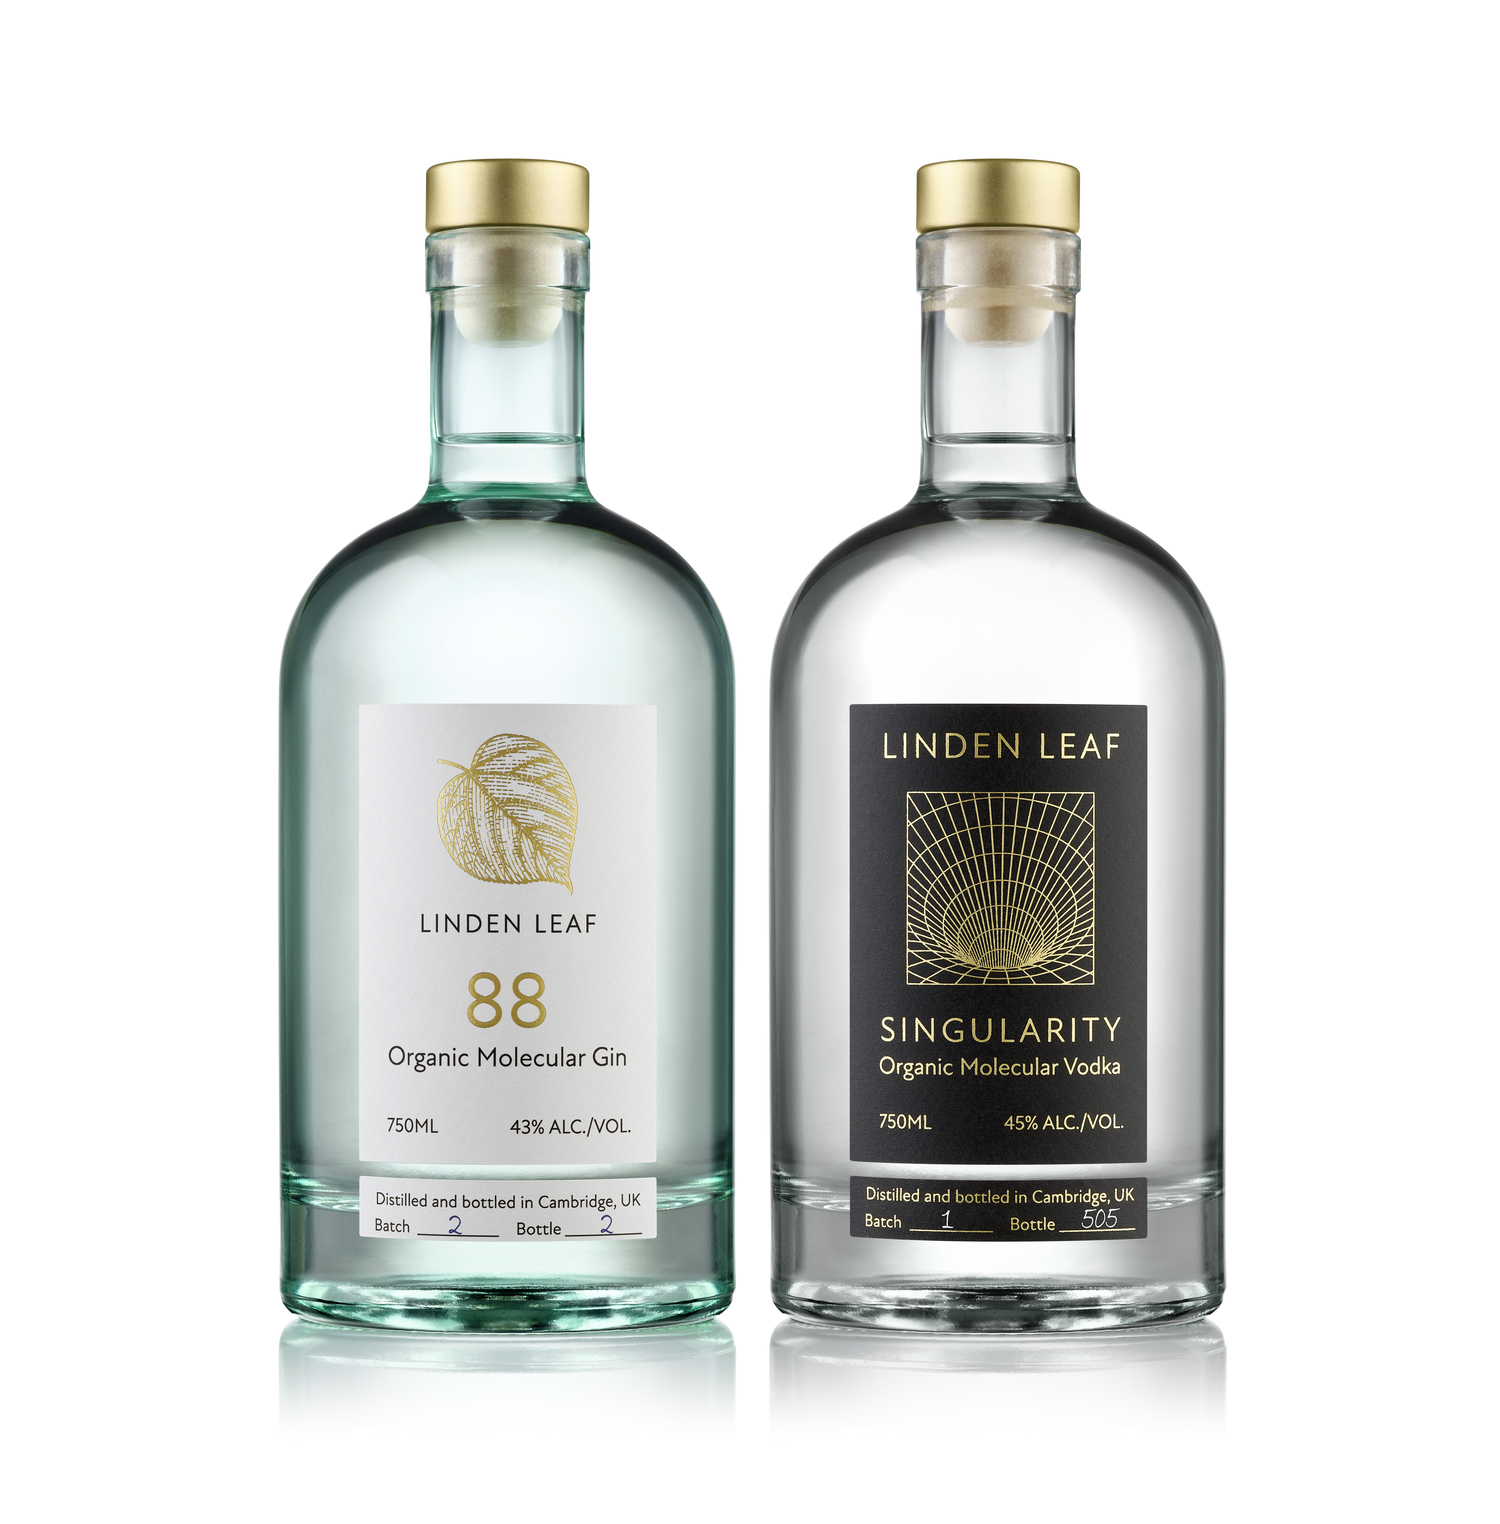 Linden Leaf's 88 Organic Molecular Gin and Singularity Organic Molecular Vodka are now available on the East End at The Surf Lodge in Montauk and Sag Harbor Kitchen and The Green Room at Sag Harbor Cinema. COURTESY LINDEN LEAF